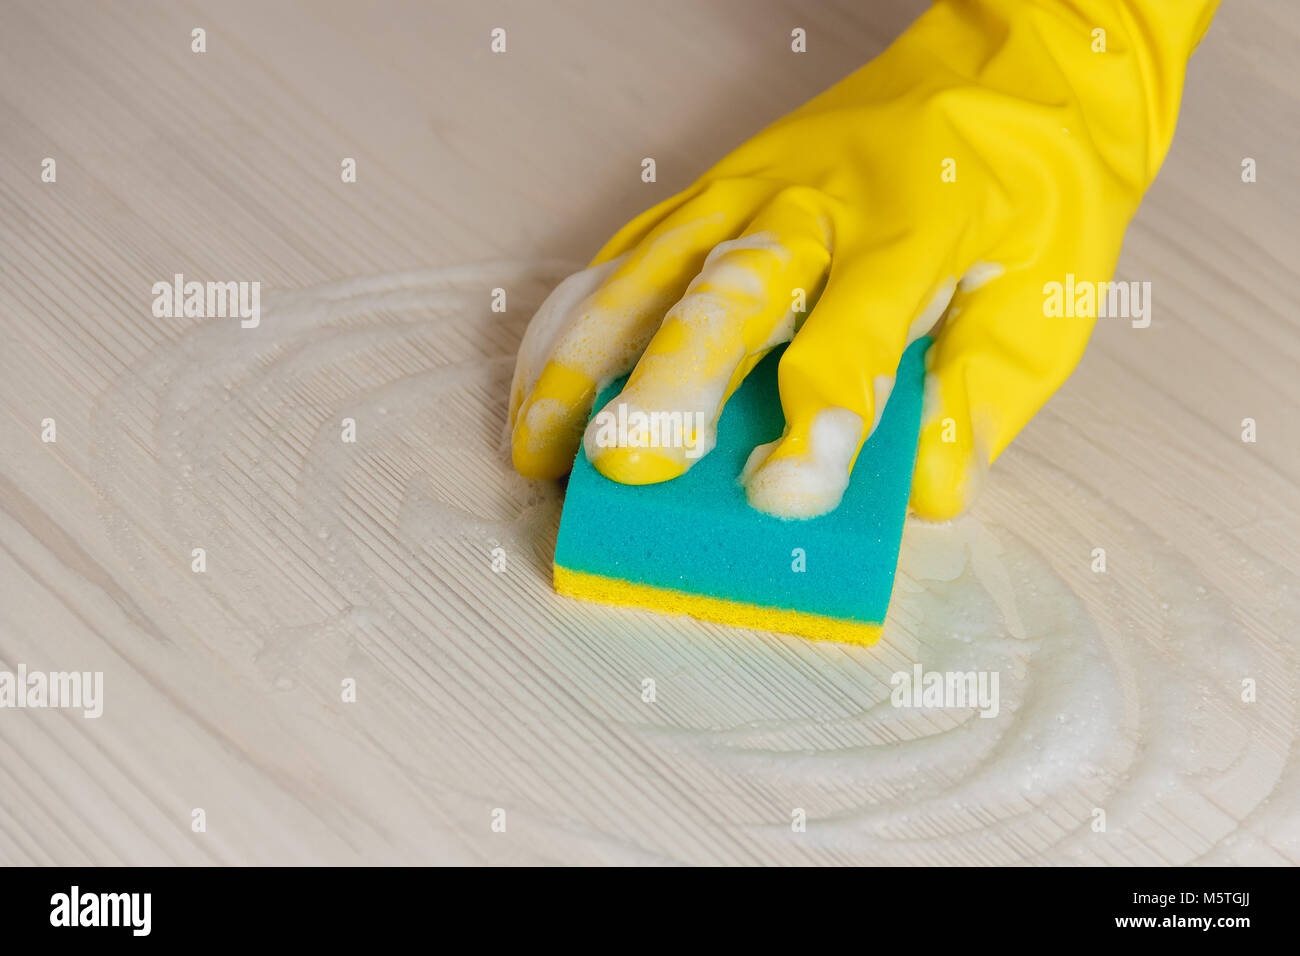 Female Hand in Yellow Glove Cleaning Light Wooden Modern Table with Blue Sponge for Home Maintenance and Housekeeping Stock Photo